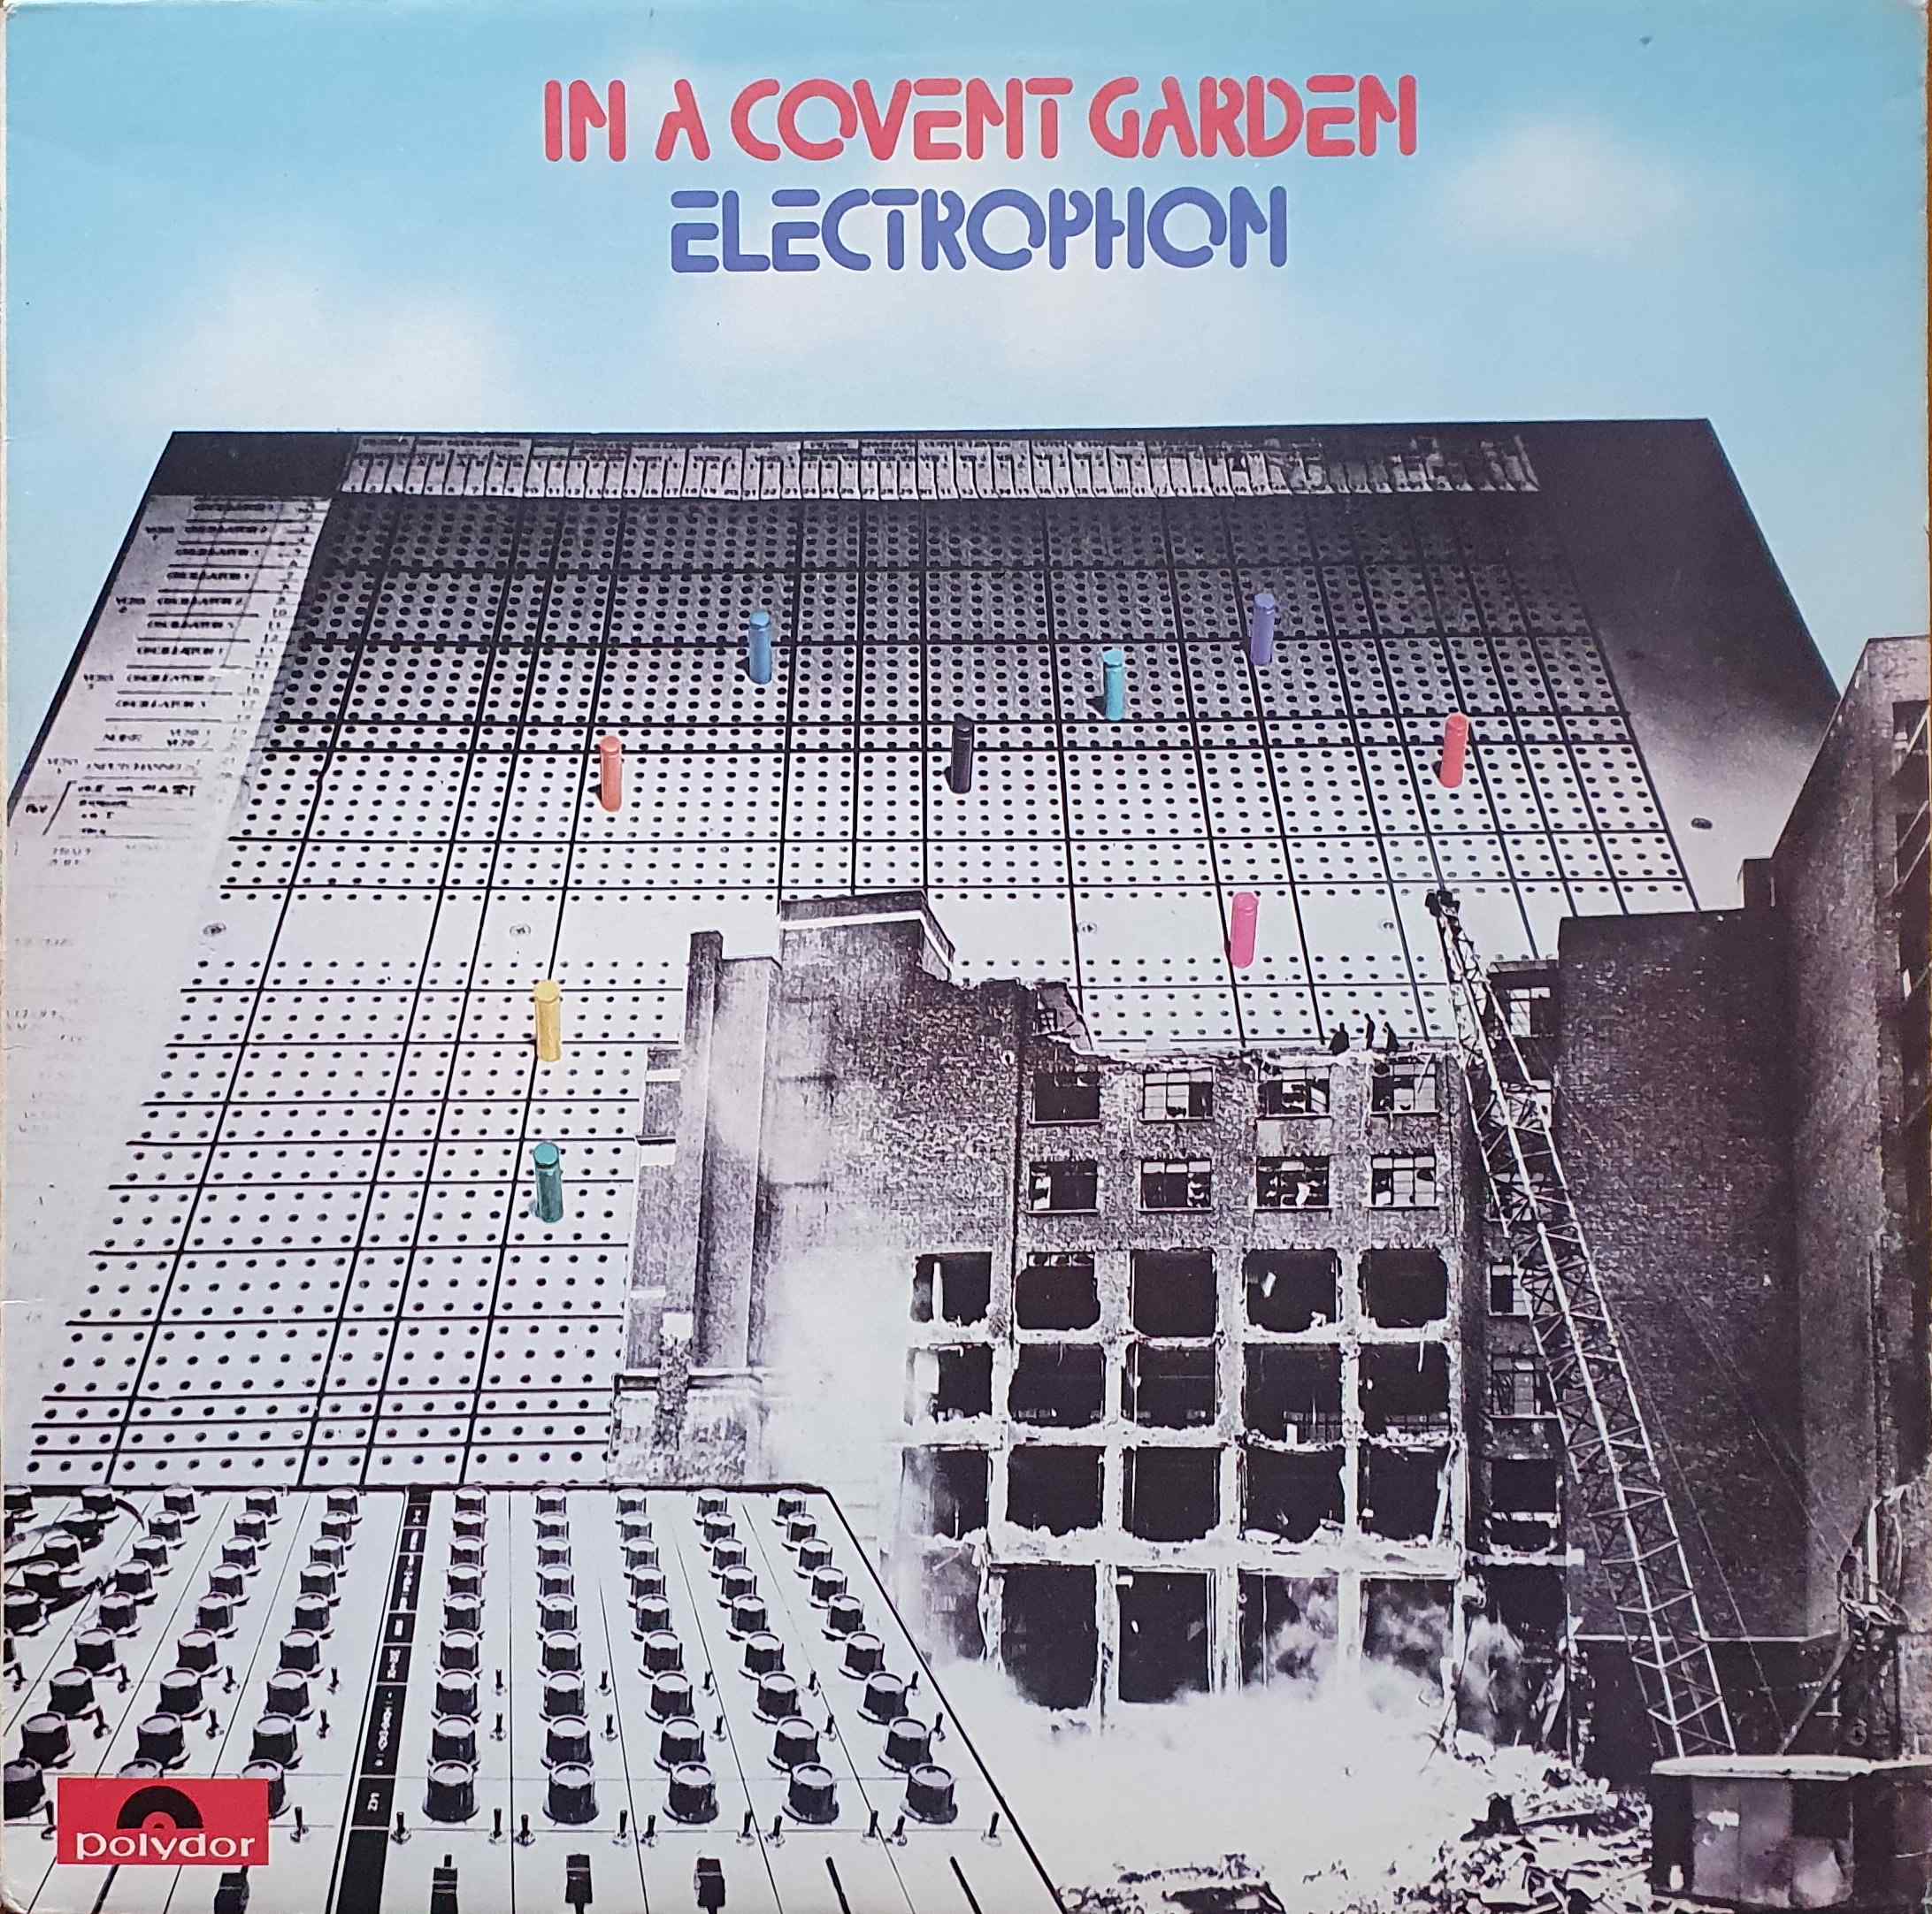 Picture of In a Covent Garden by artist Arr. Hodgson / Simpson from the BBC albums - Records and Tapes library